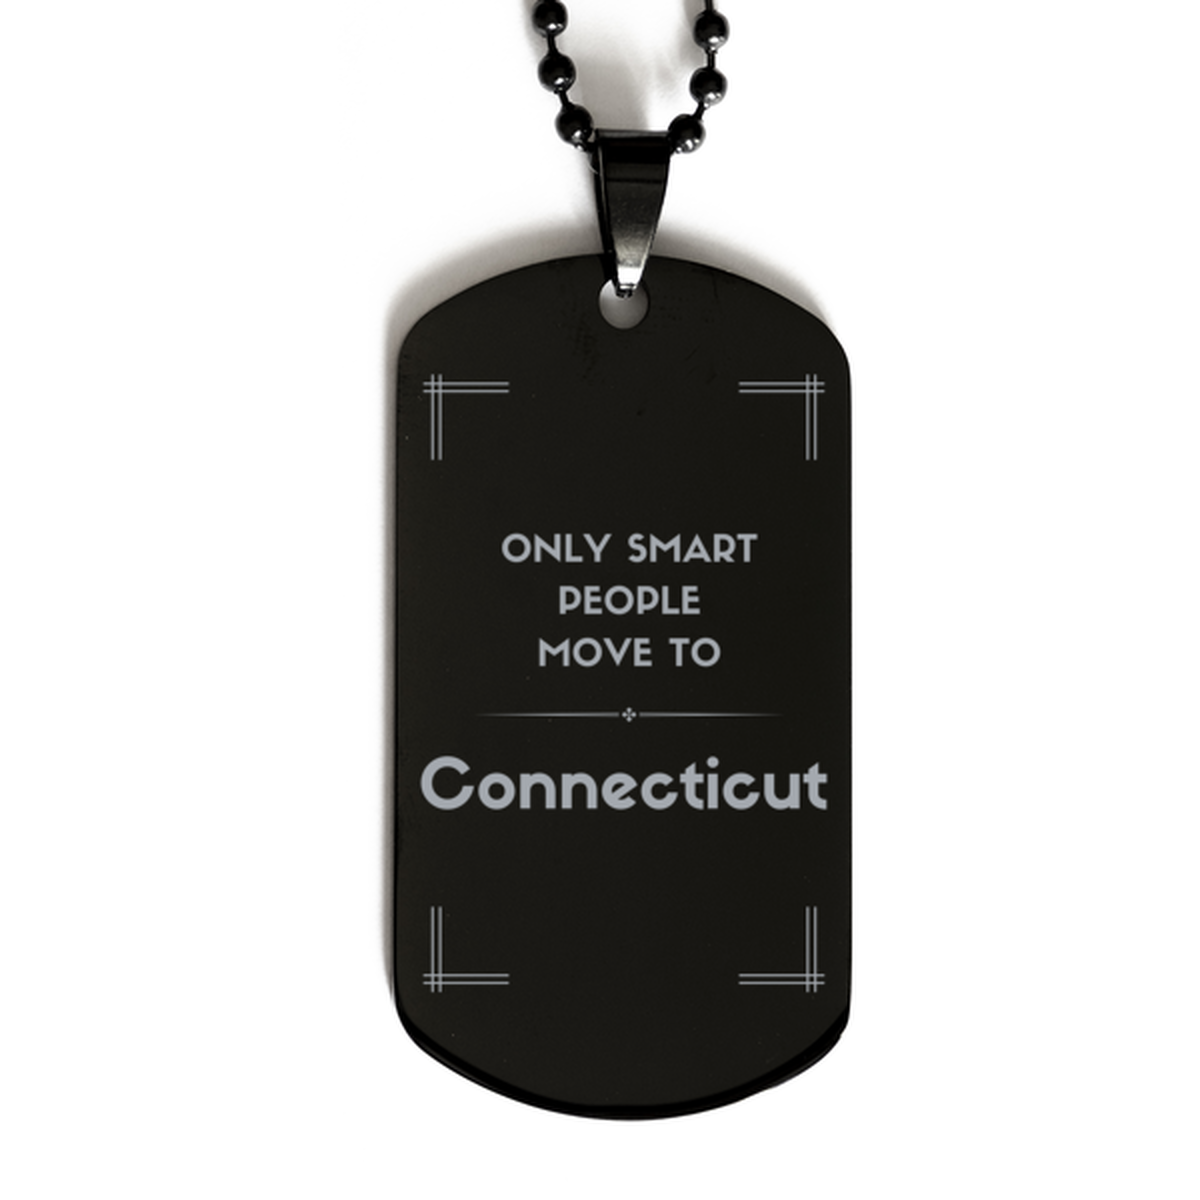 Only smart people move to Connecticut Black Dog Tag, Gag Gifts For Connecticut, Move to Connecticut Gifts for Friends Coworker Funny Saying Quote